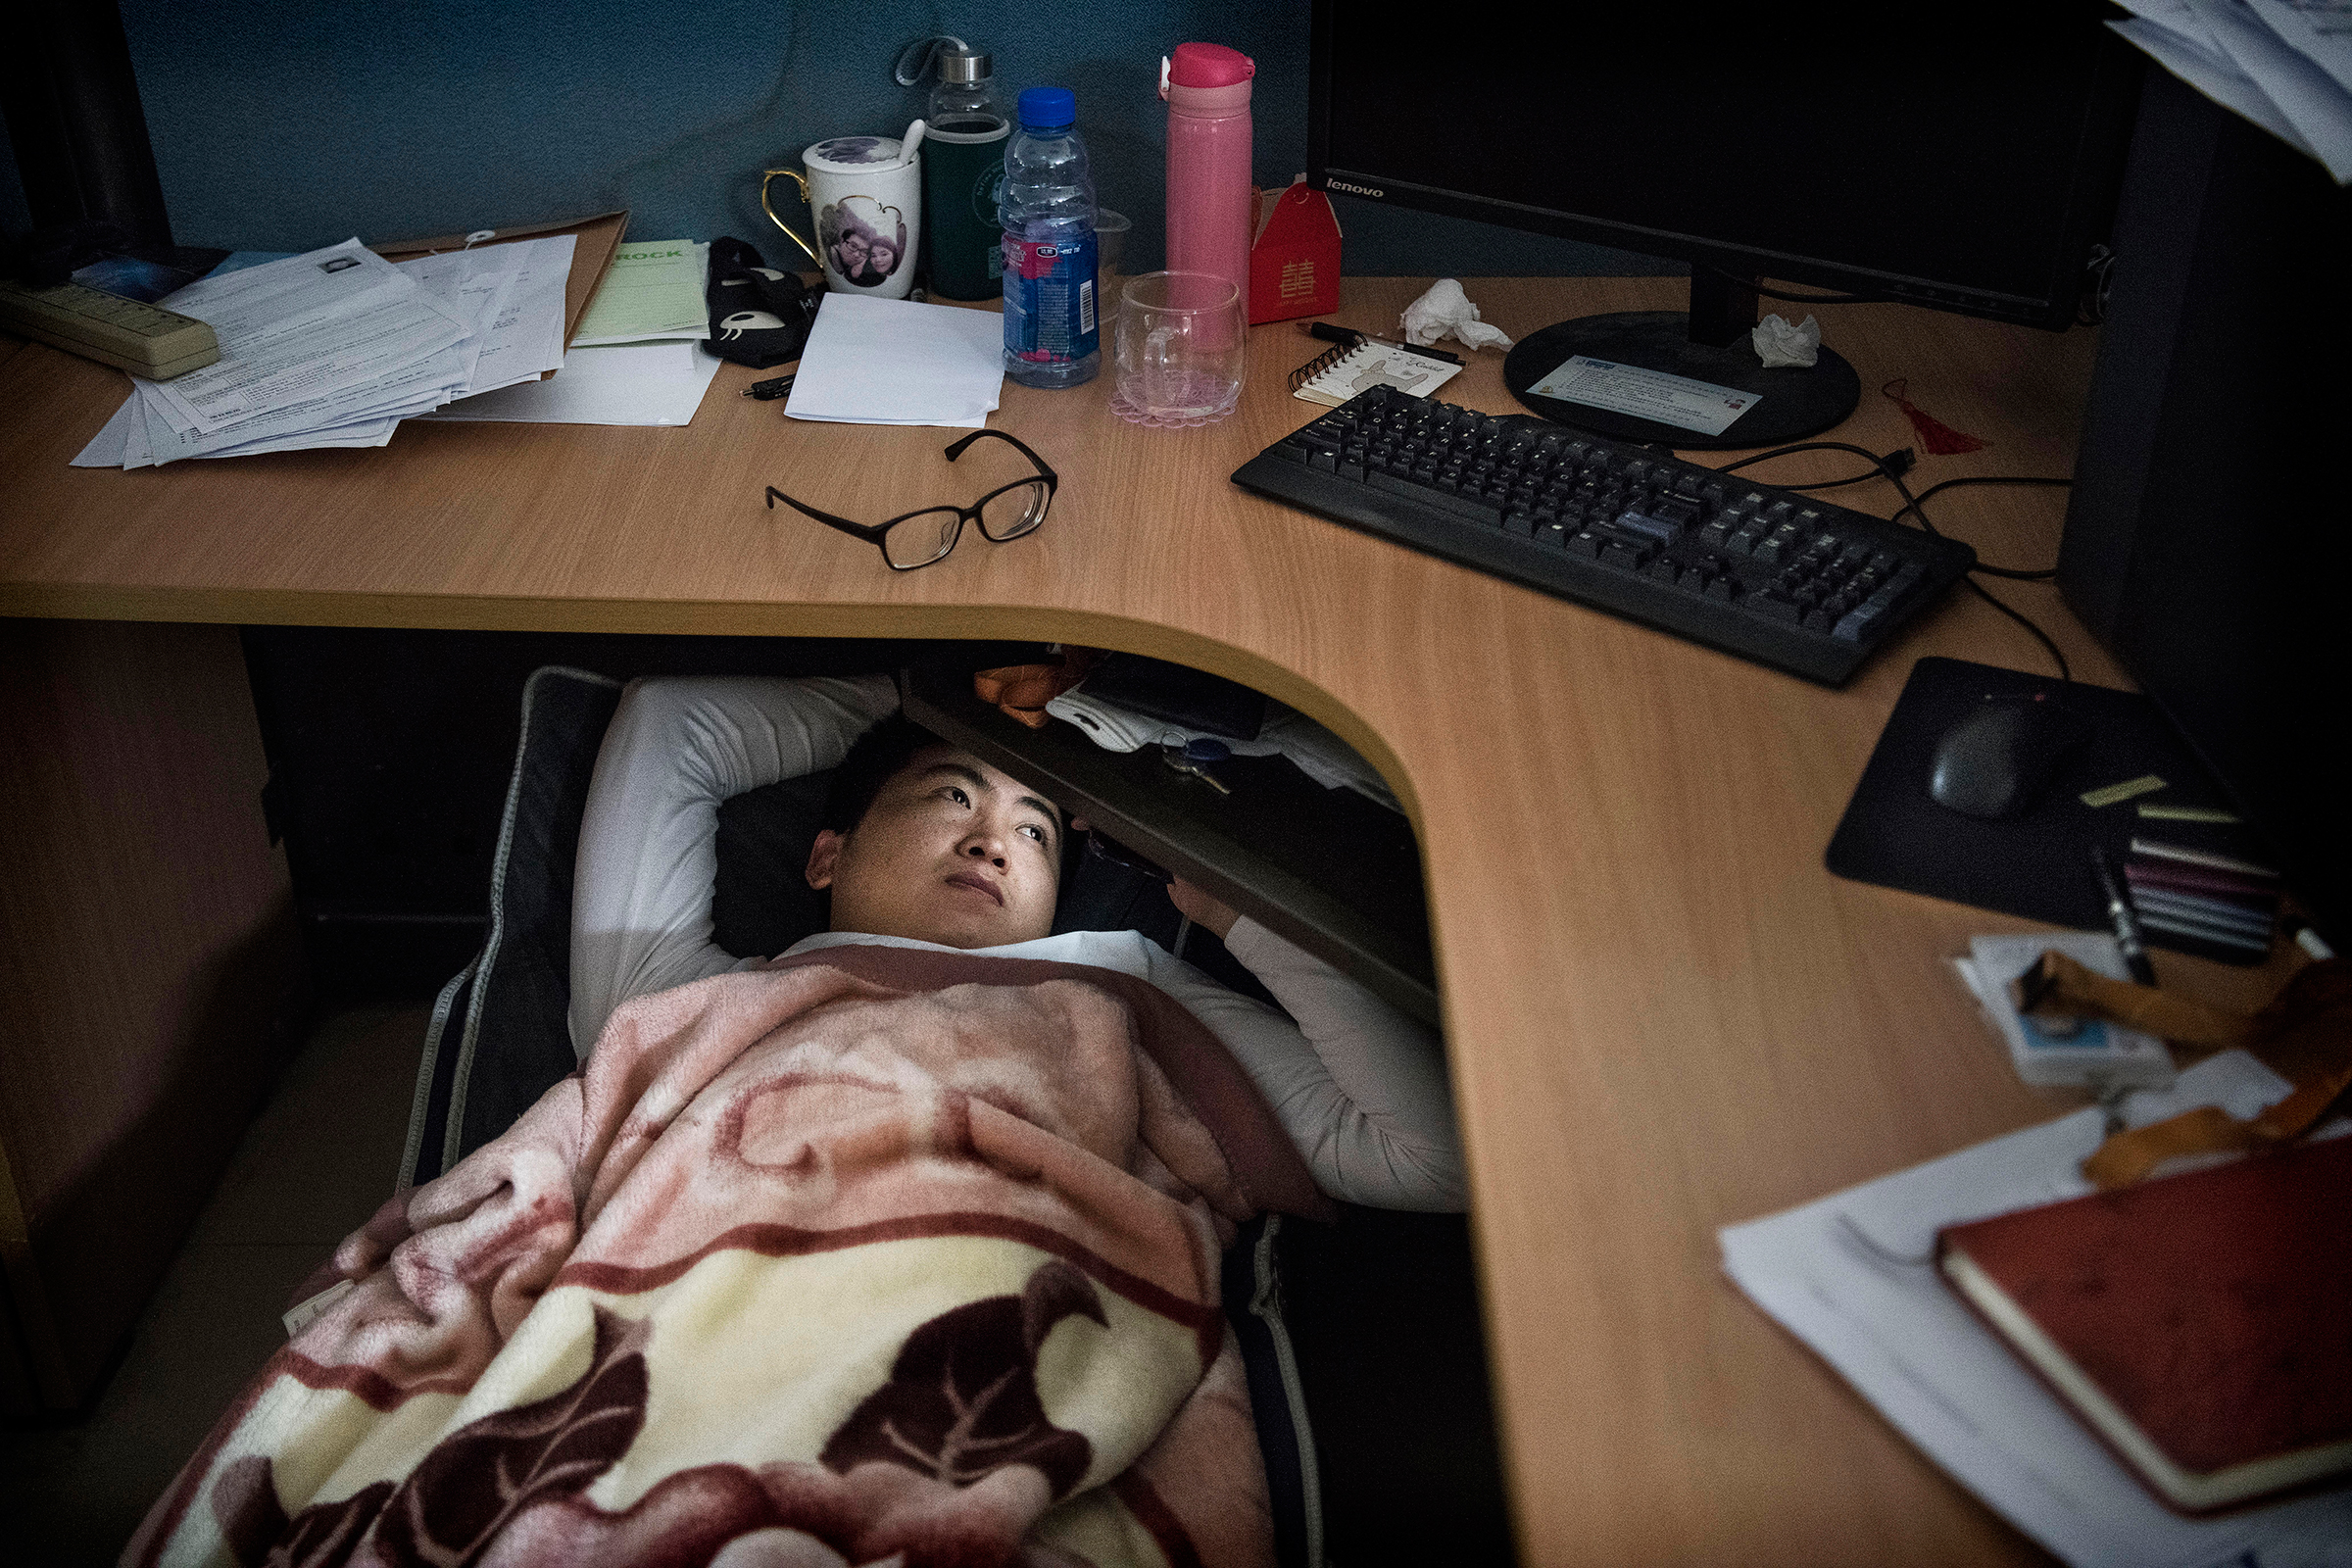 A Huawei employee watches a program on his smartphone as he rests at his cubicle during a lunch break at the research and development area in the Bantian campus in Shenzhen, China, on April 12, 2019.